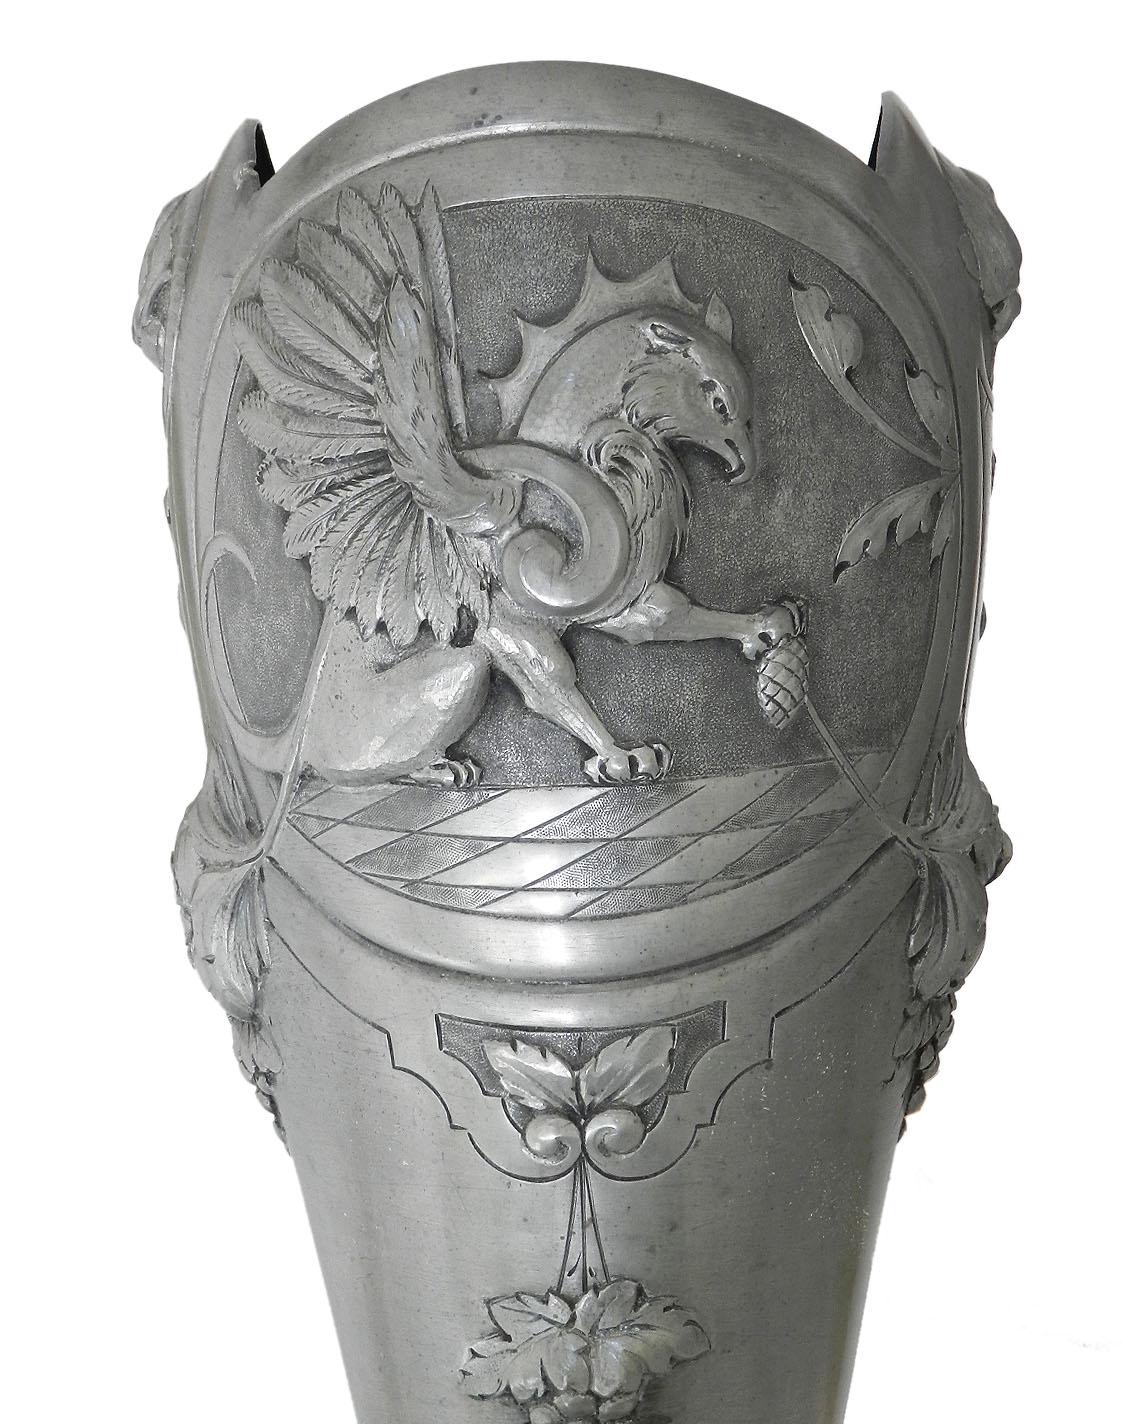 Exceptional Art Nouveau vase Pewter signed A Villien, circa 1890-1910 tall and impressive
Stunning with Phoenix and Lion heads
Very good antique patina, this vase could be polished if preferred
Impressive with signs of age and wear and very slight